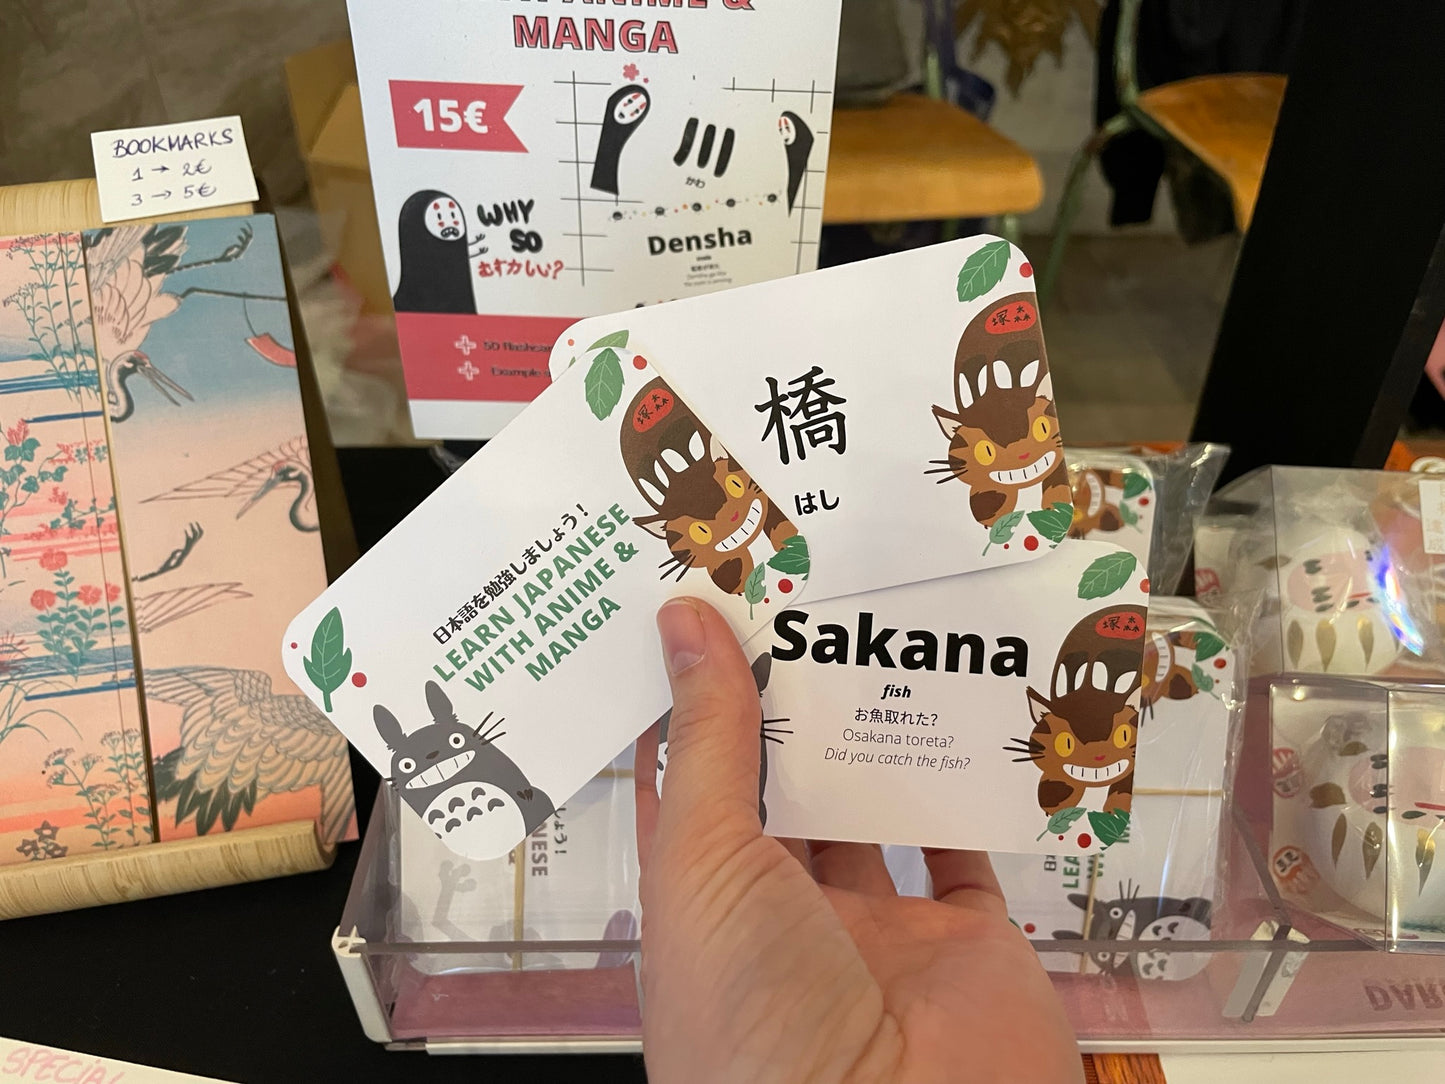 Flashcards to Learn Japanese